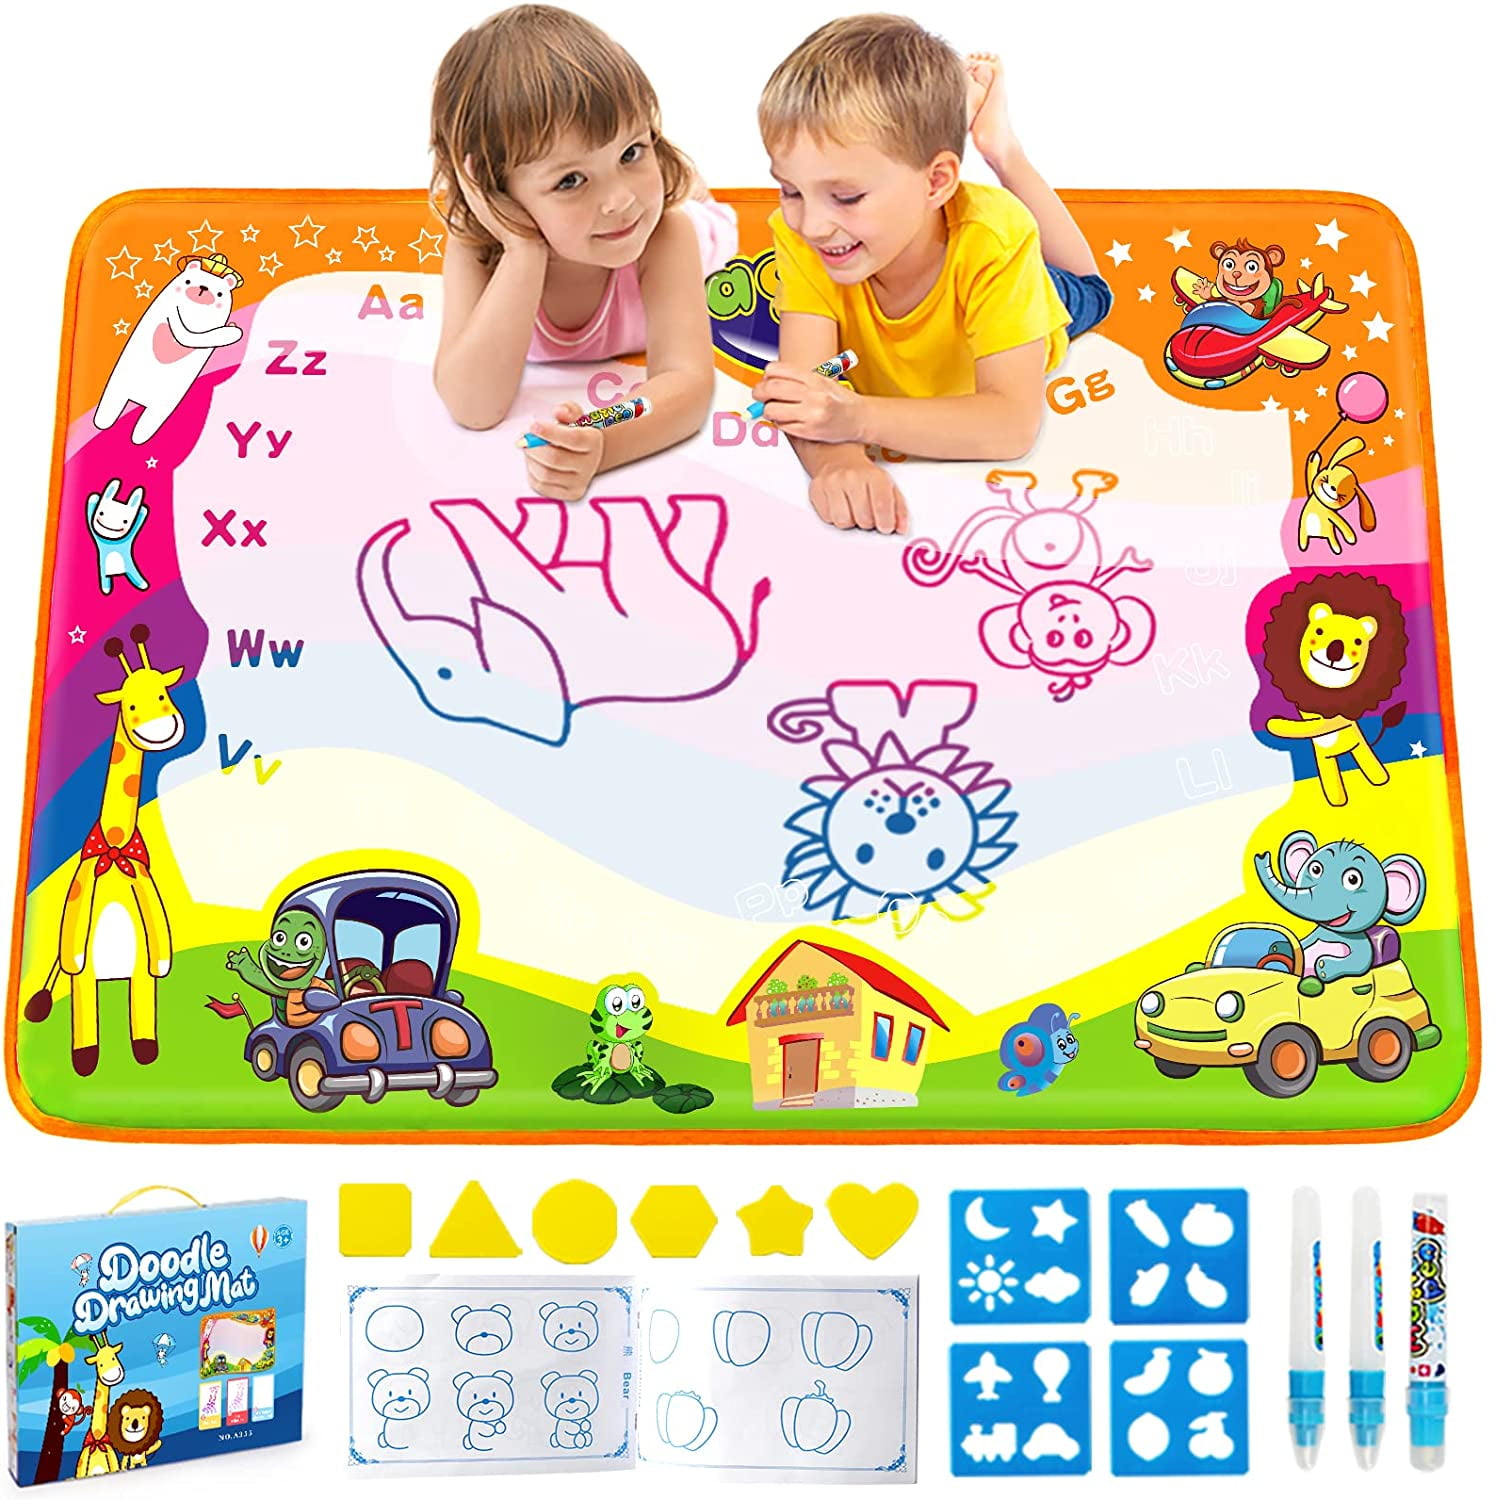 40 x 32 Aqua Magic Water Doodle Mat 5 Magic Water Pens and Drawing Accessories Theefun Water Drawing Mat Toddlers Painting Board Writing Mat with 6 Magic Stamps